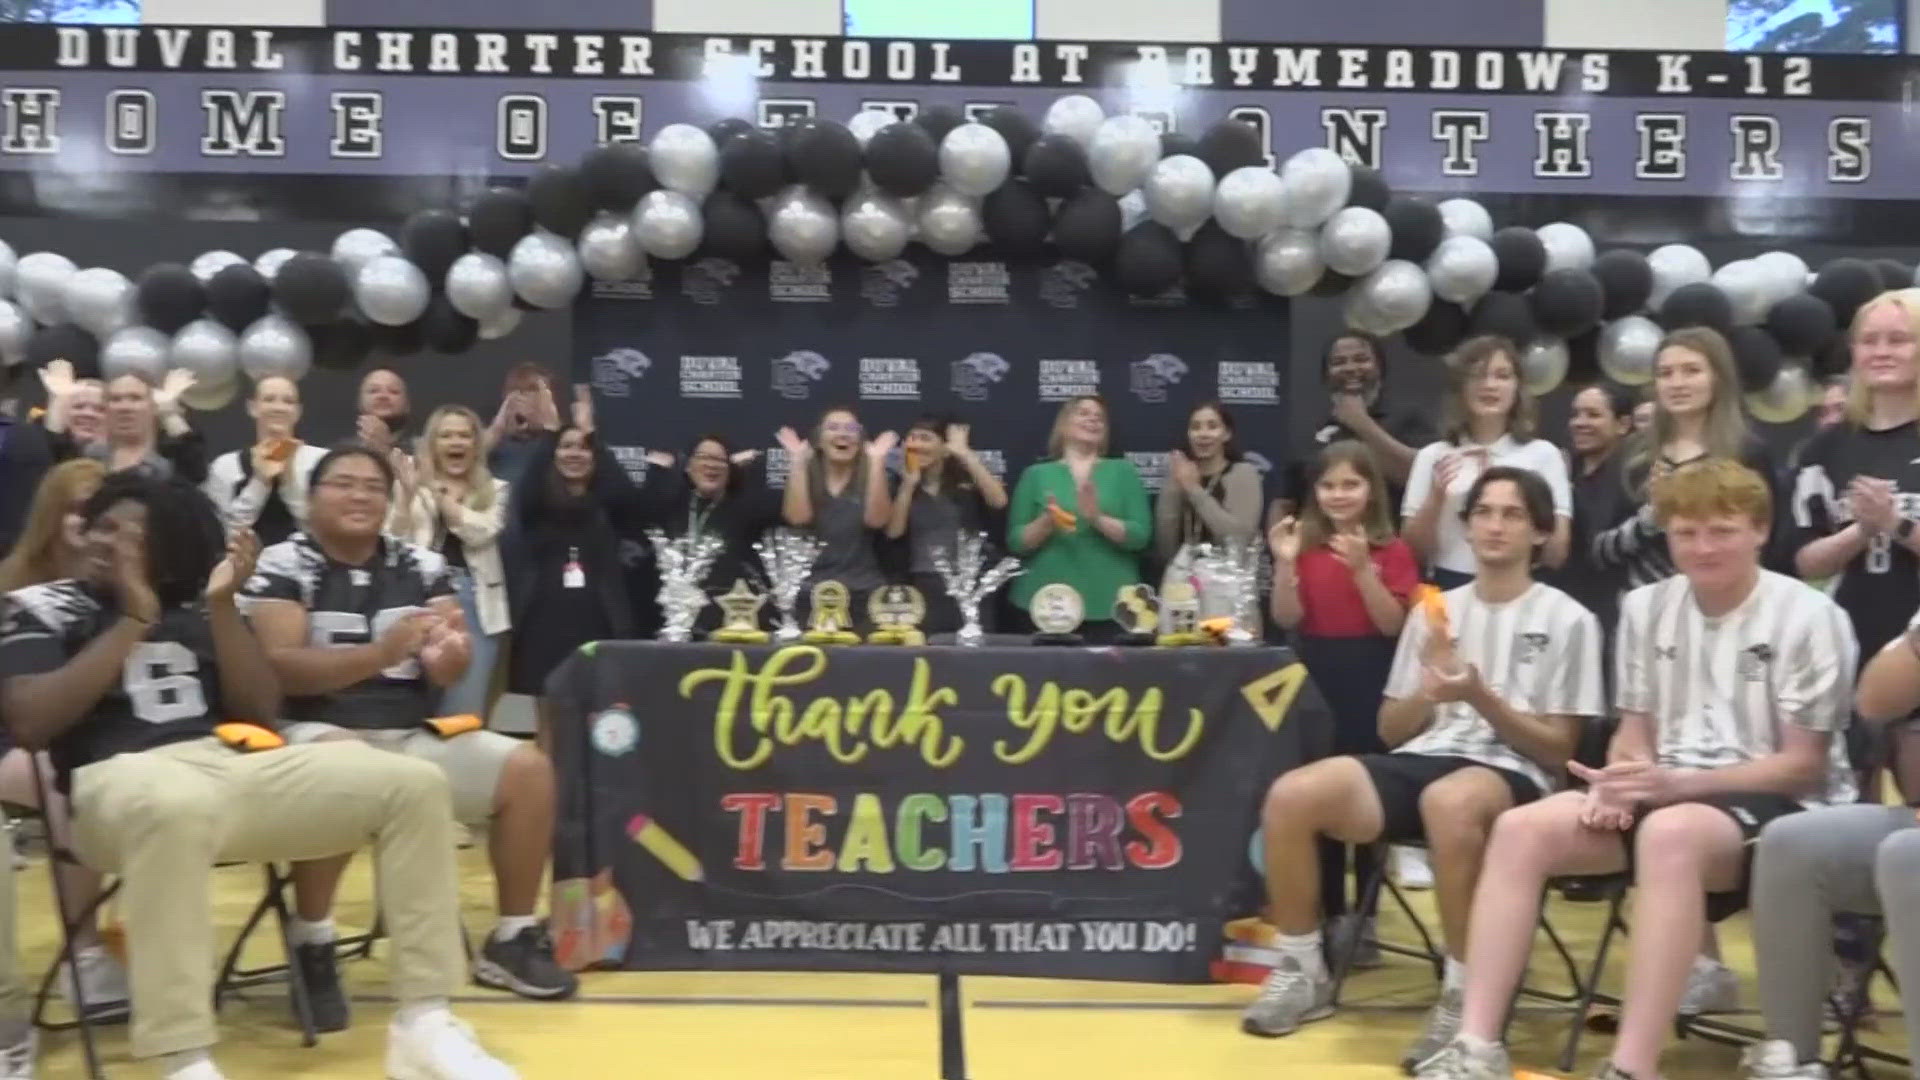 Thirty teachers at Duval Charter School Baymeadows K-12 were celebrated in a big way on National Teacher Appreciation Day Tuesday.